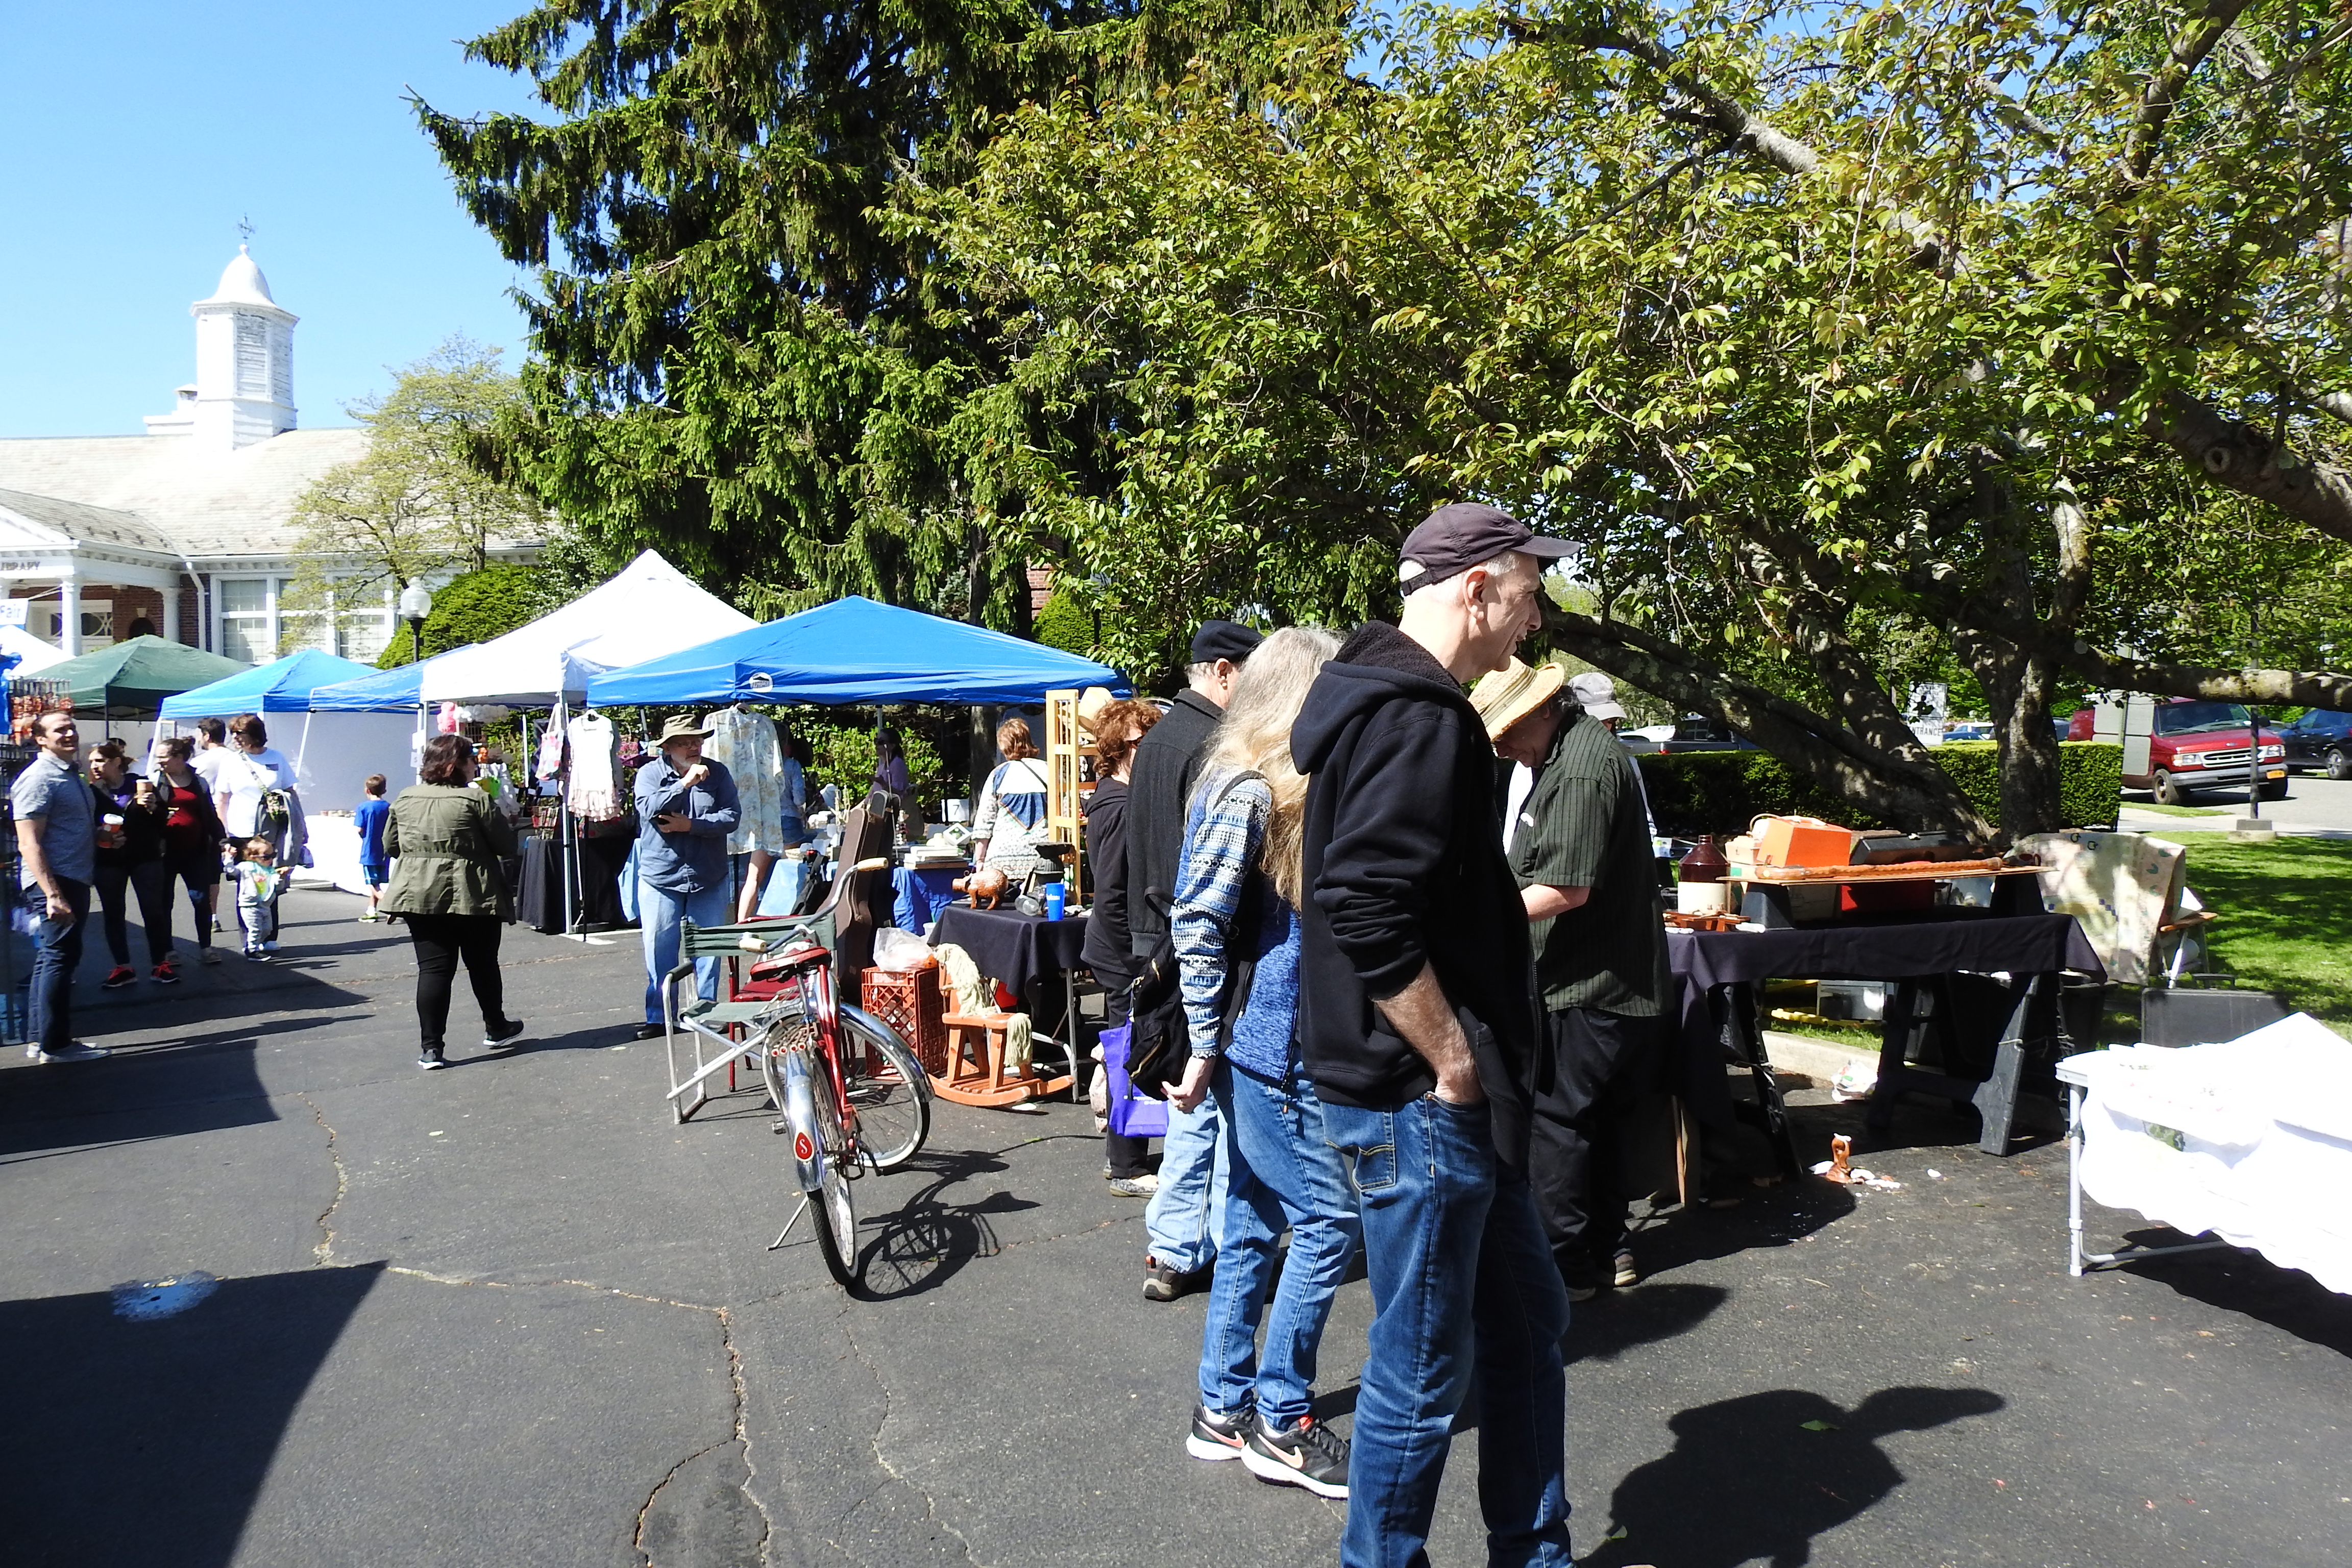 vendors and shoppers at the craft fair